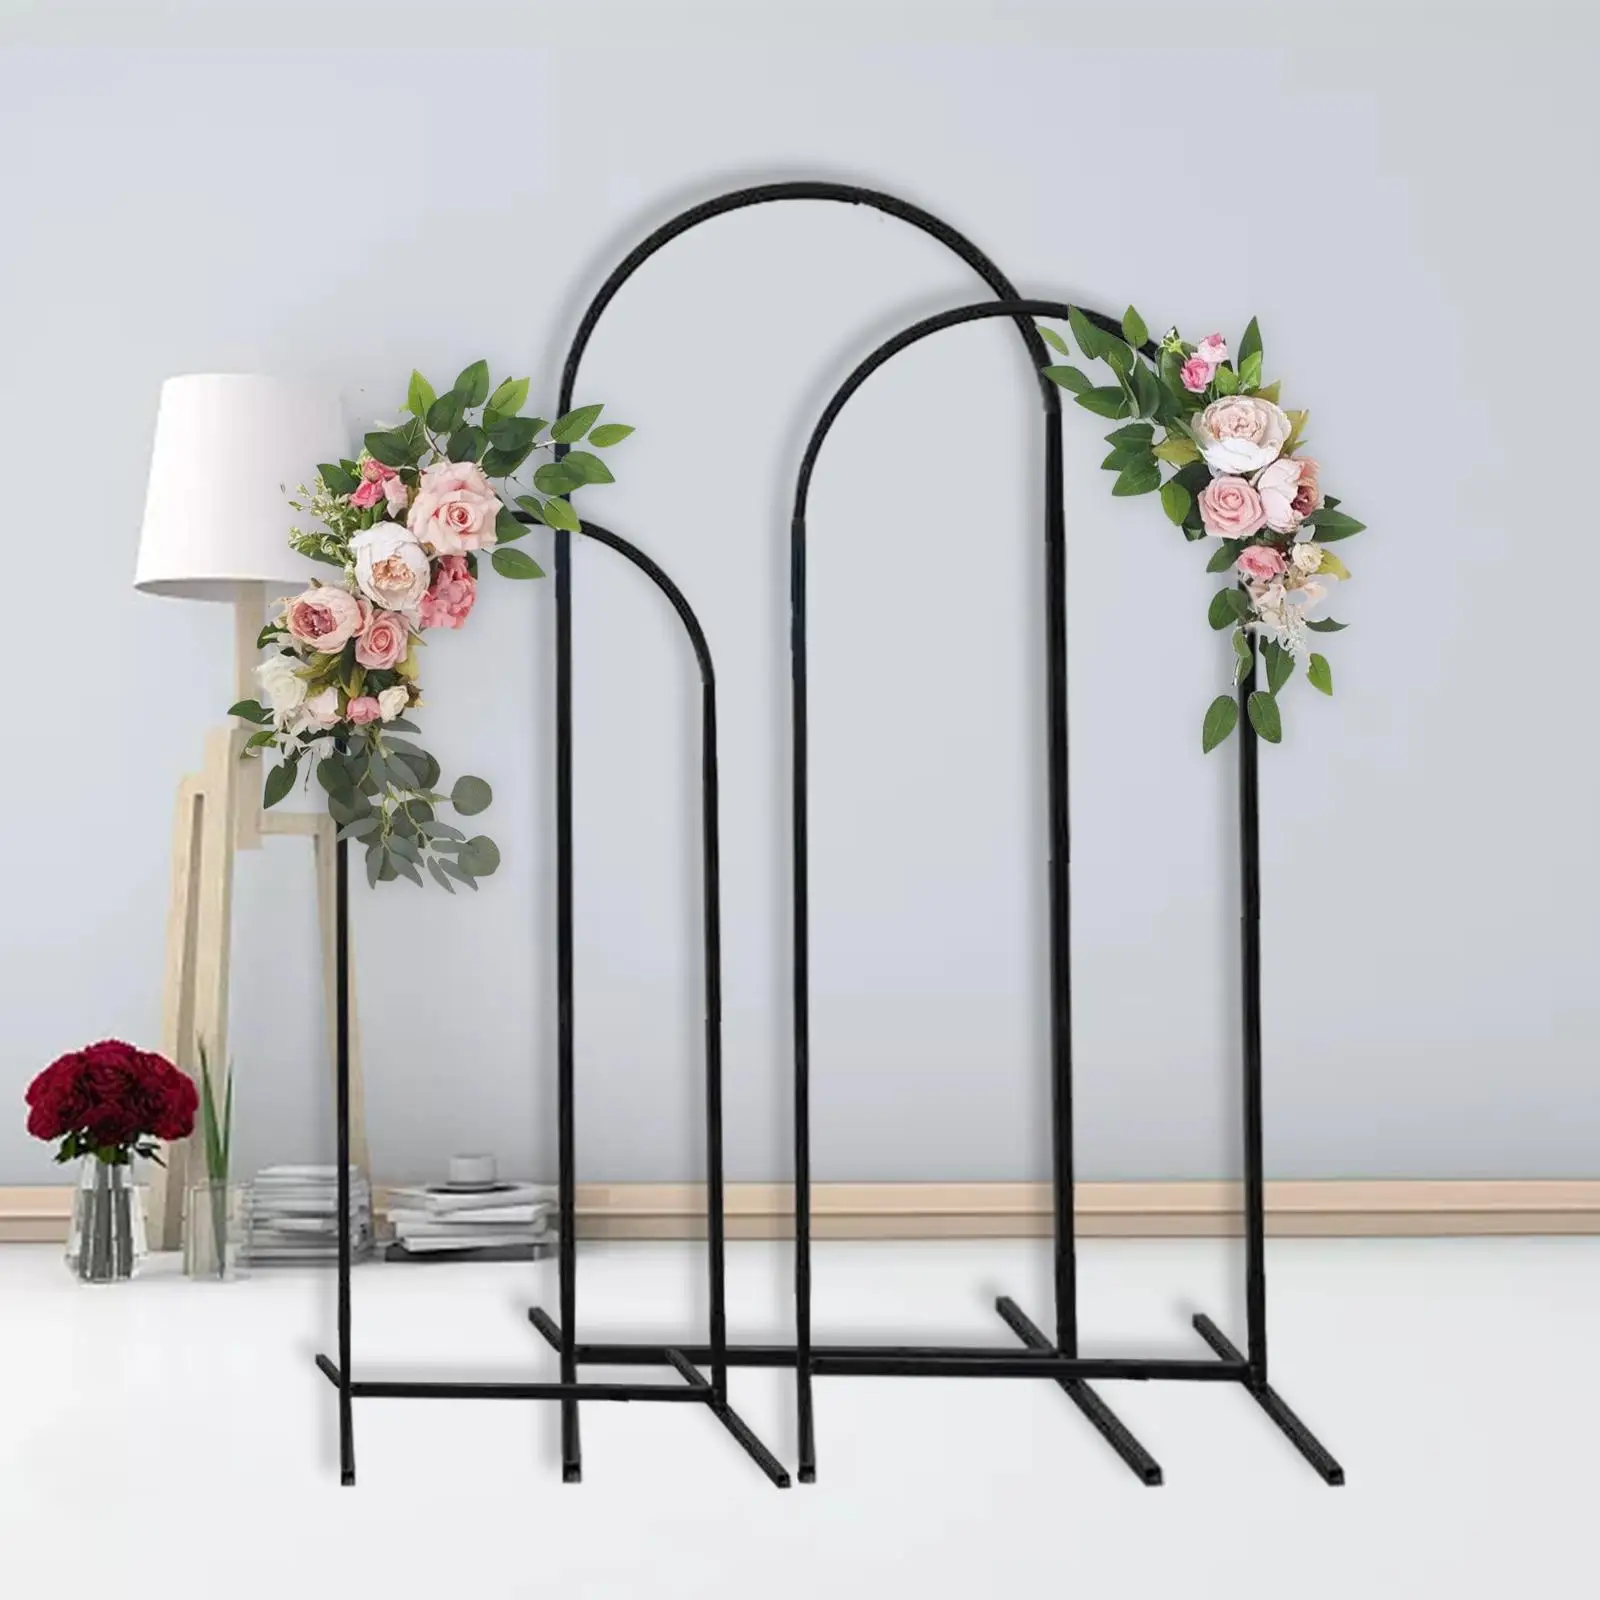 2Pcs Wedding Arch Flowers Kit Party Wall Artificial Flower Swags Arch Decor